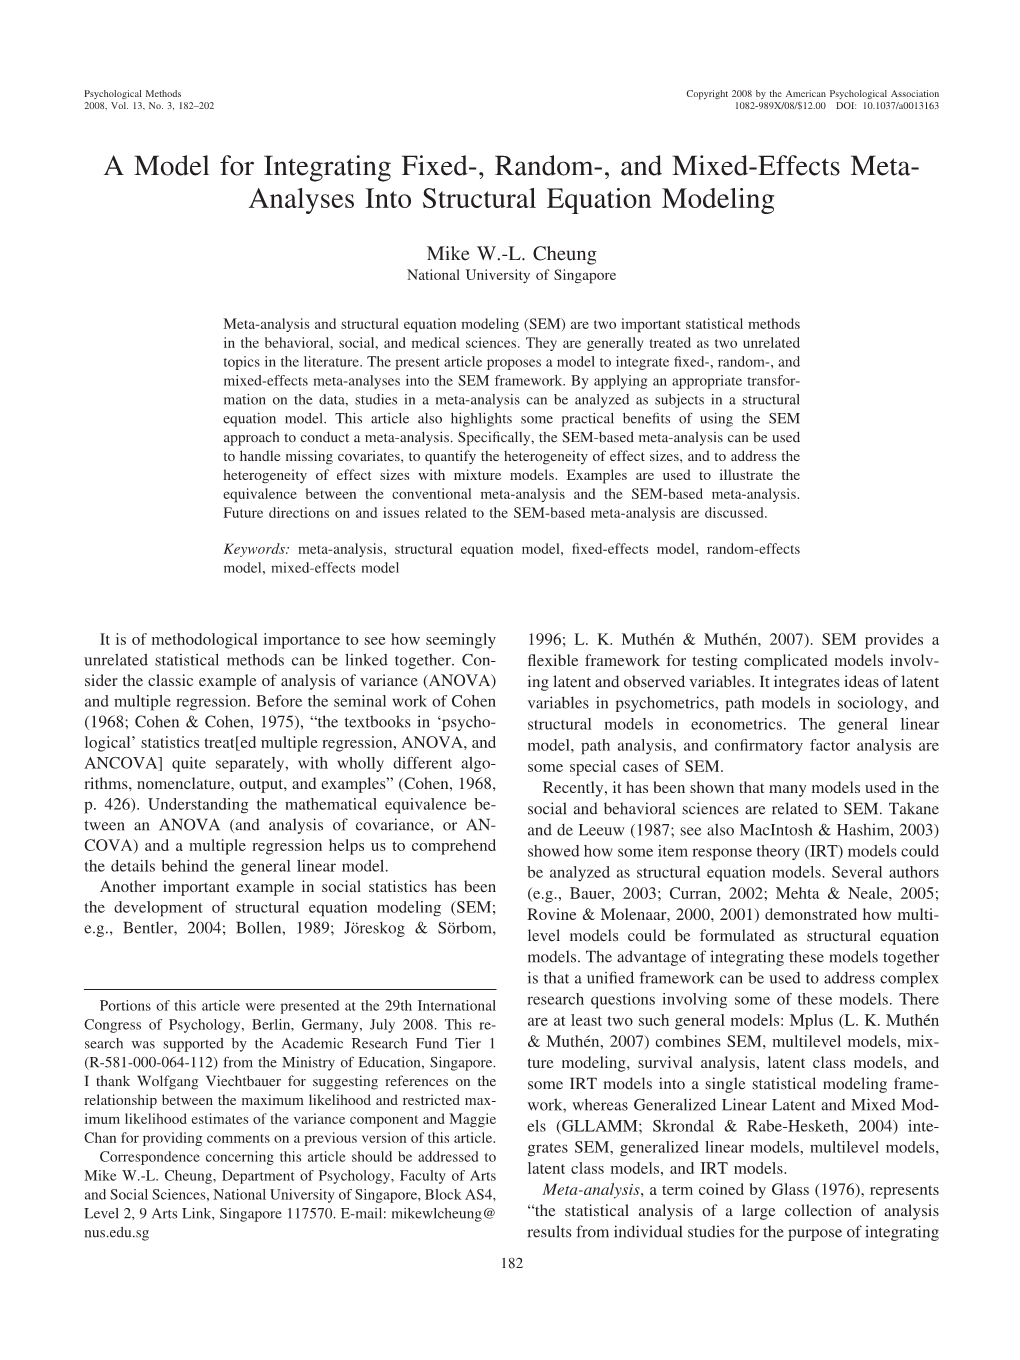 A Model for Integrating Fixed-, Random-, and Mixed-Effects Meta- Analyses Into Structural Equation Modeling